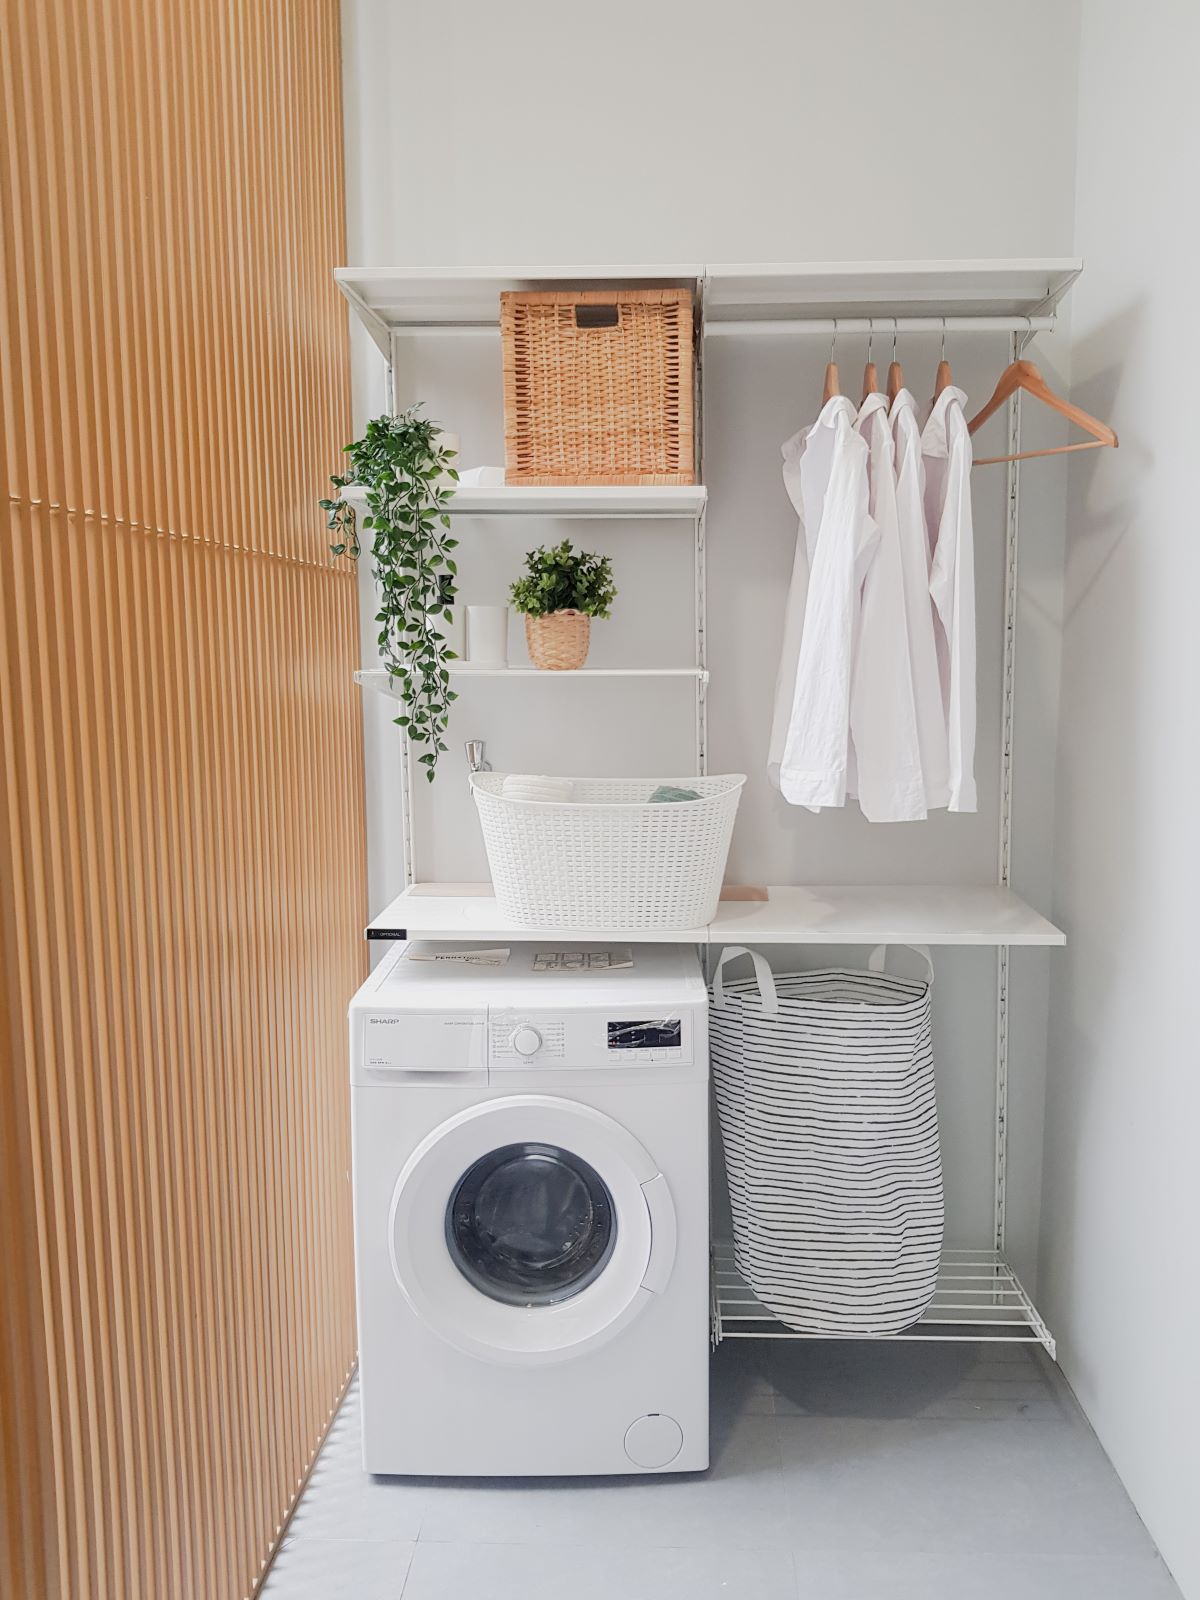 Laundry Room Decoration Ideas: 5 Essential Elements To Design The Luxury Laundry Room You Didn'T Know You Needed 4 Daily Mom, Magazine For Families